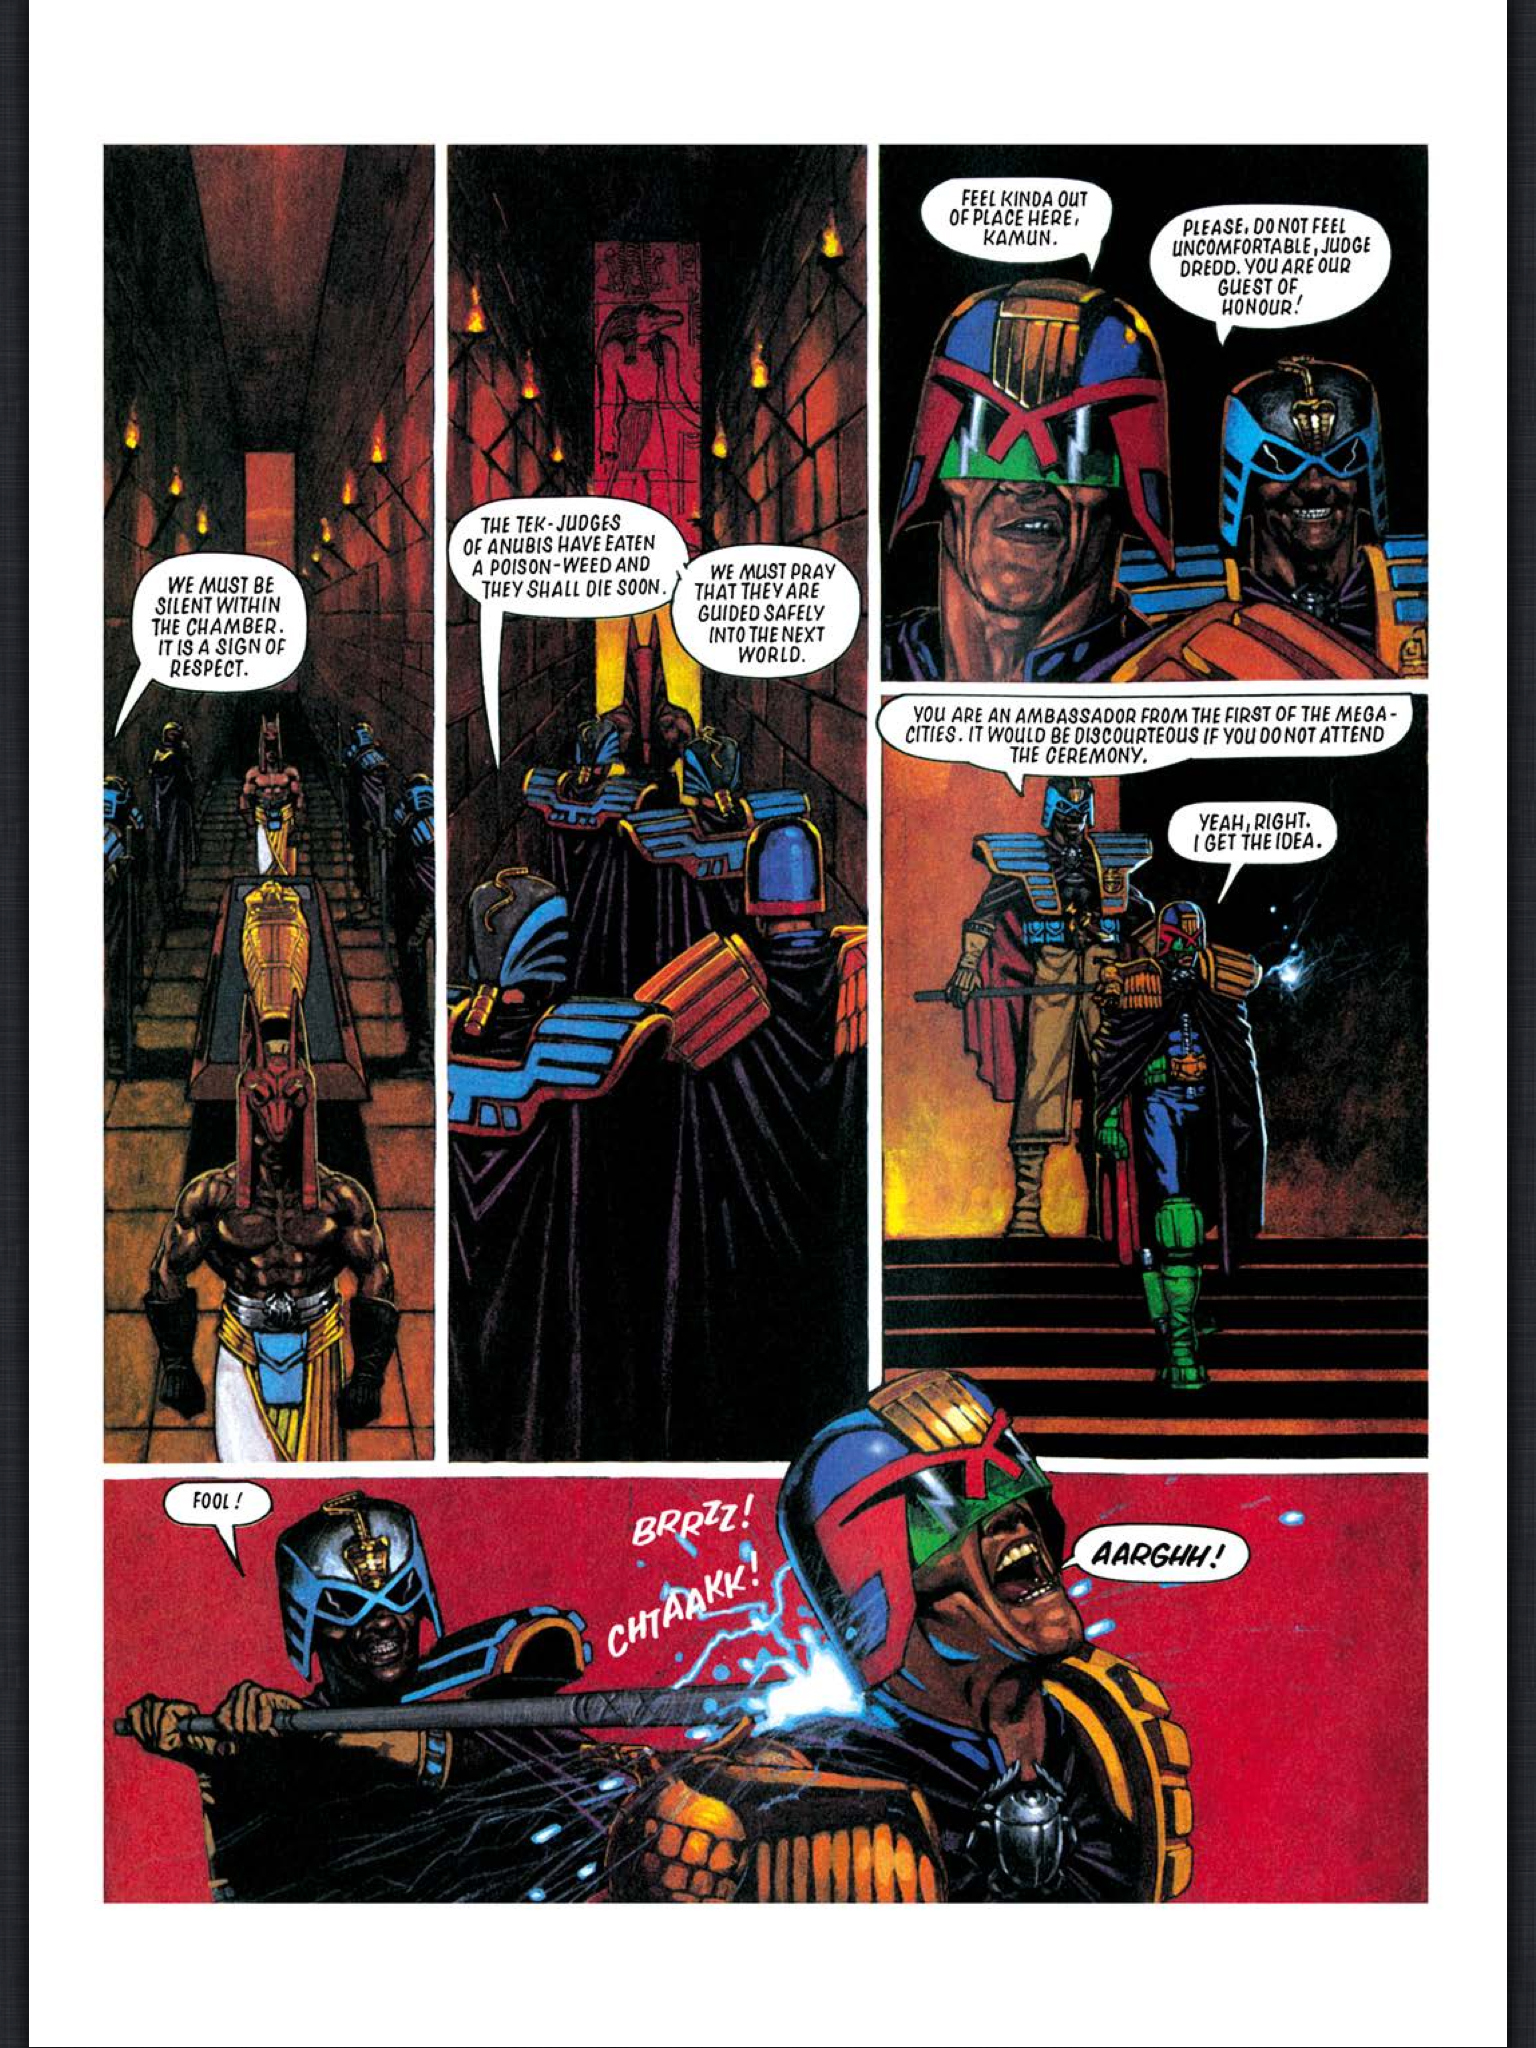 Read online Judge Dredd: The Complete Case Files comic -  Issue # TPB 20 - 47